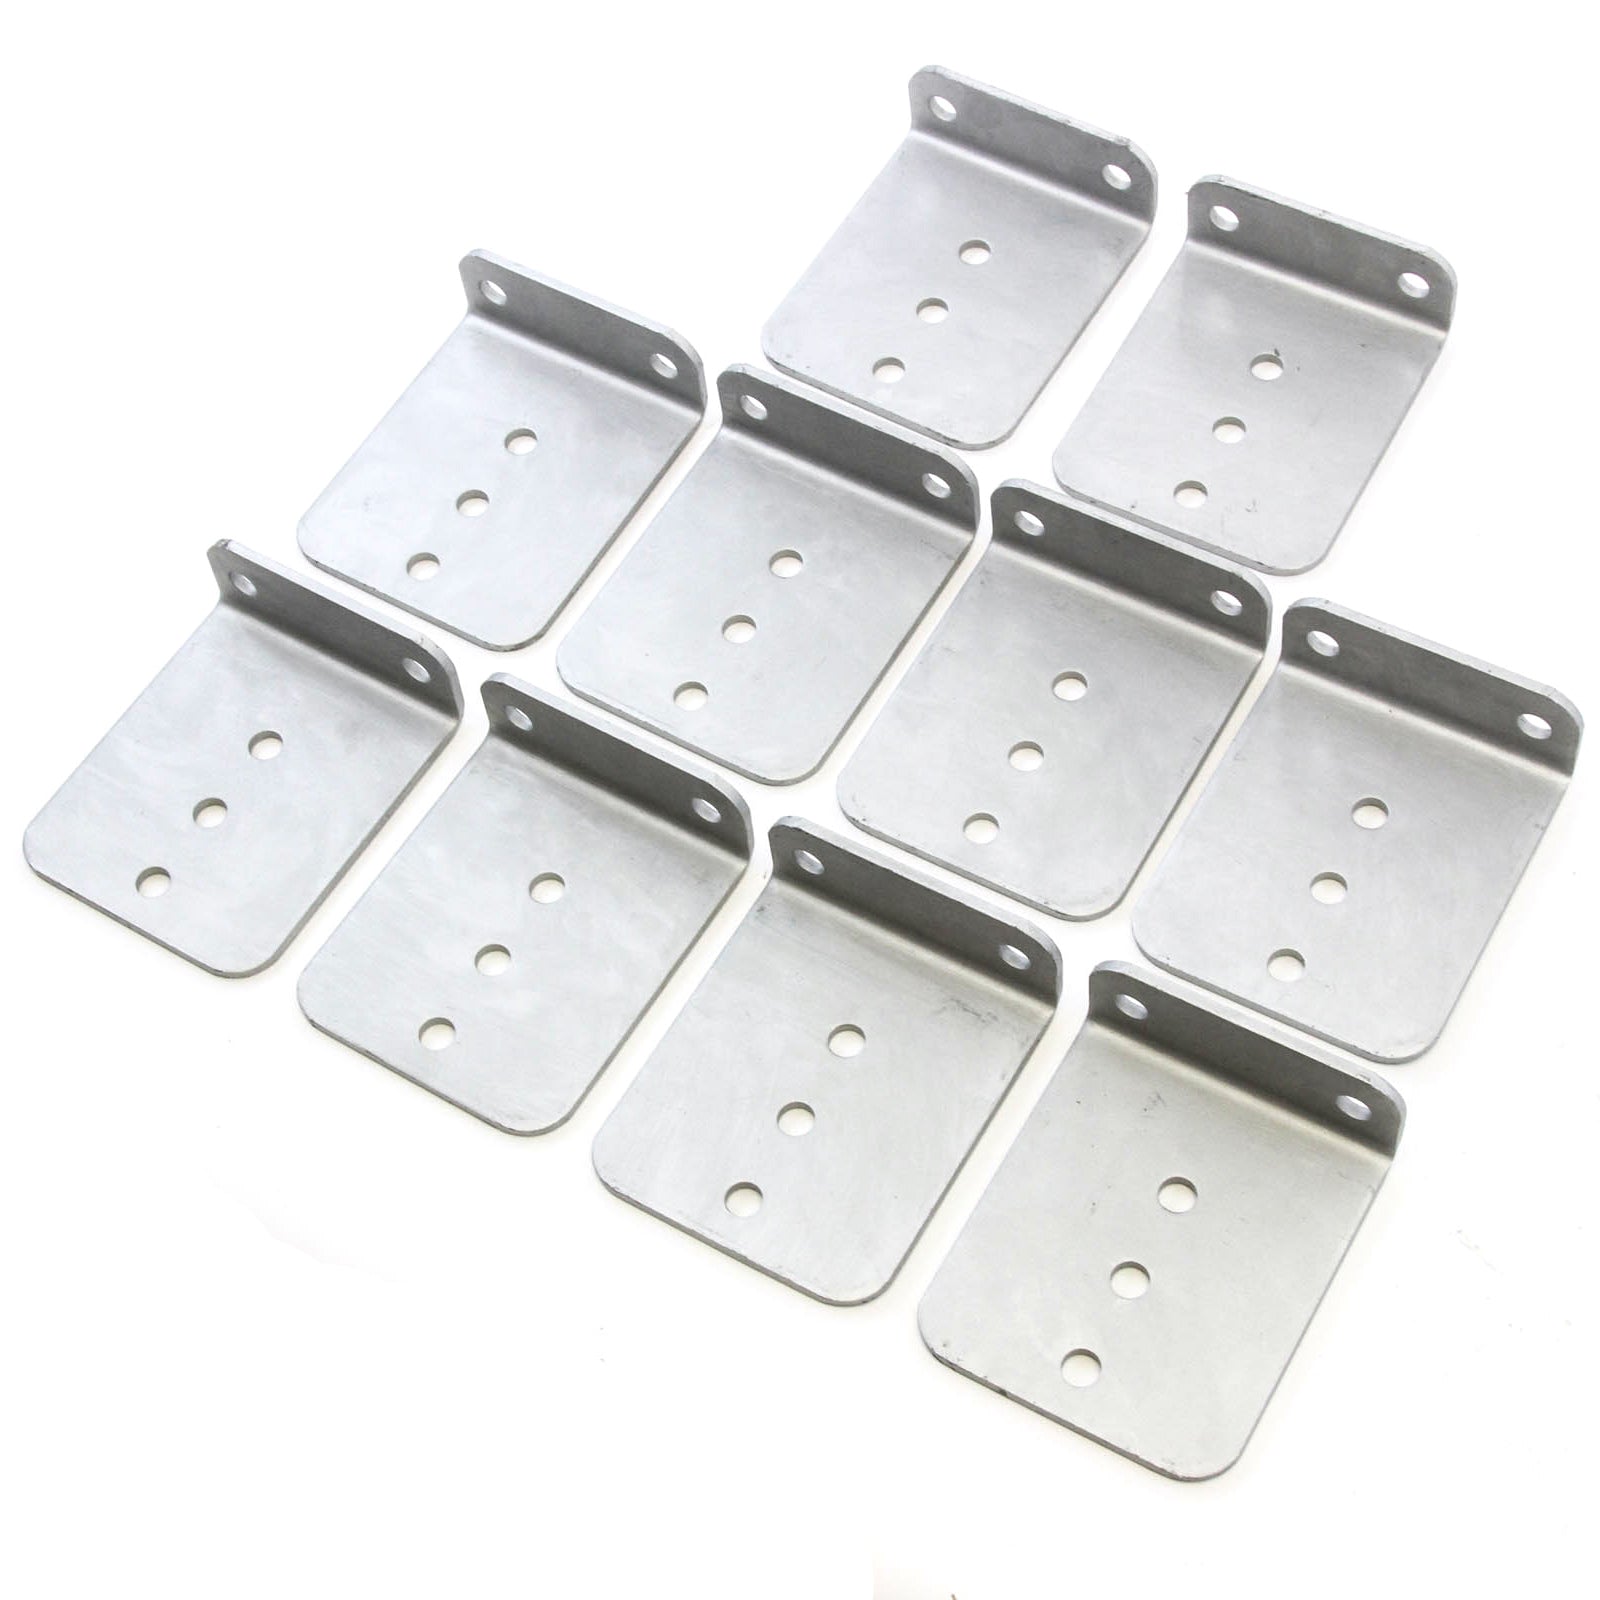 10 L Type Bunk Bracket 6 Inches Tall Hot Dipped Galvanized Boat Trailer Brackets Set